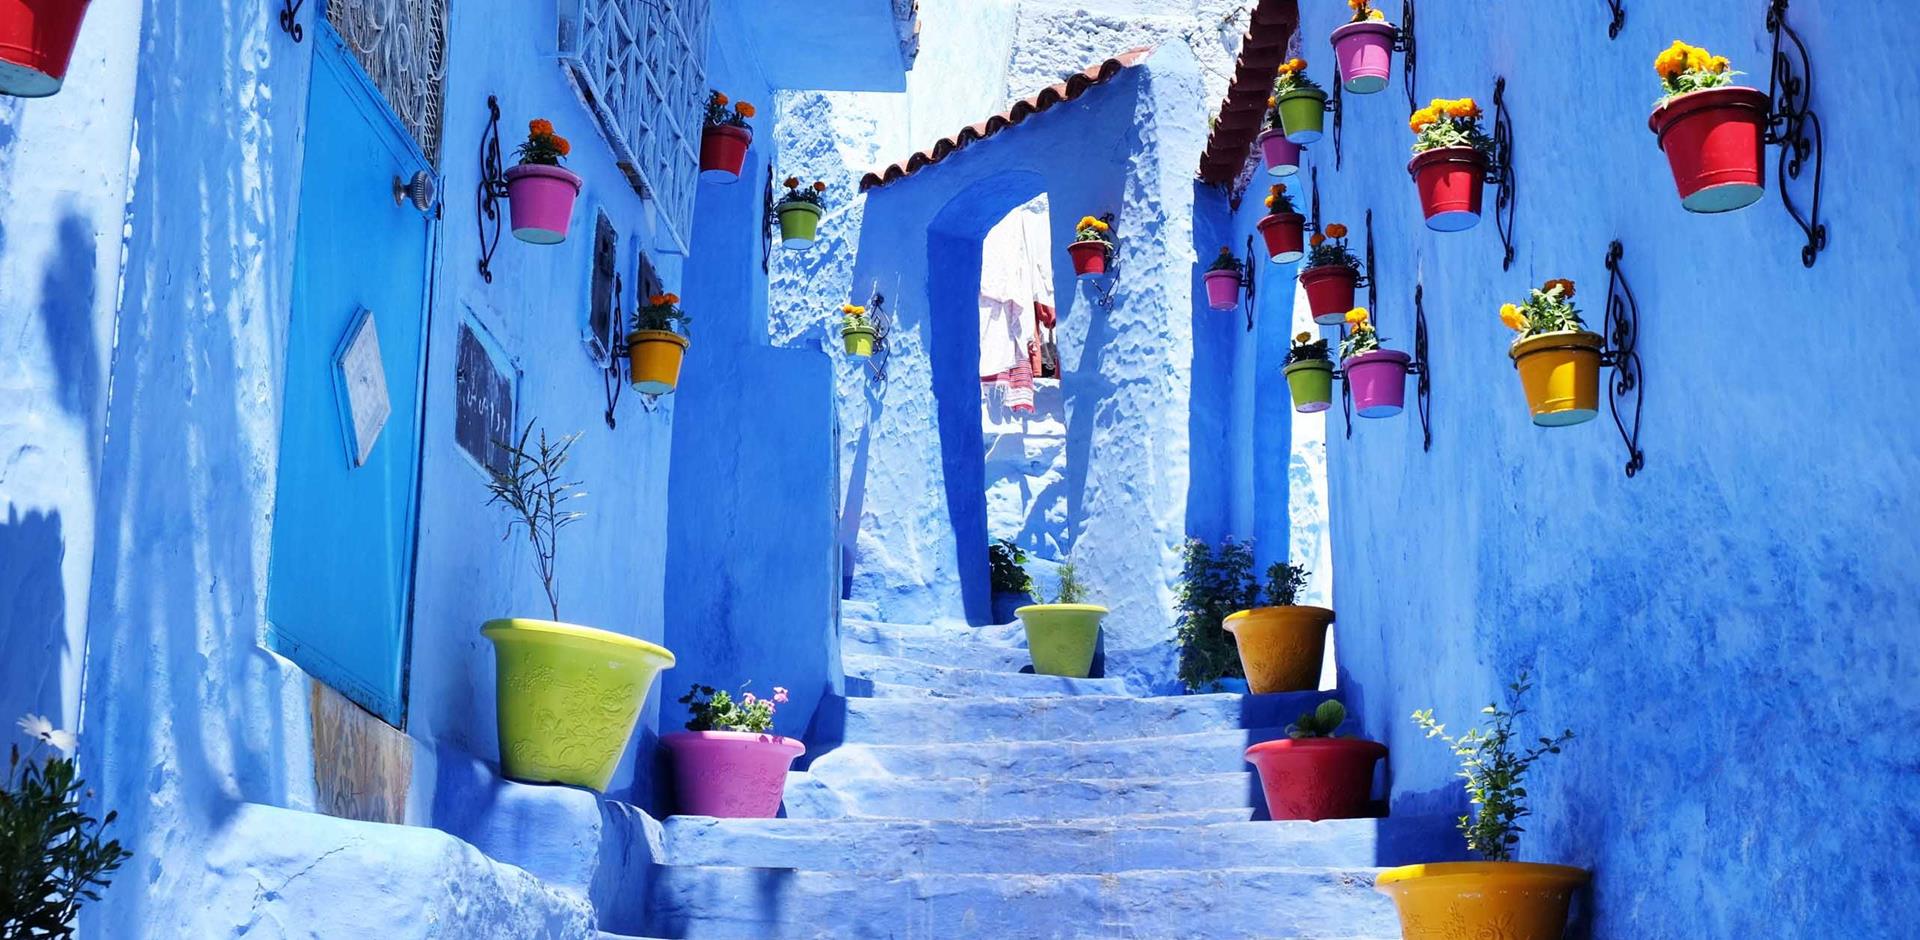 Traditional moroccan architectural details in Chefchaouen, Morocco